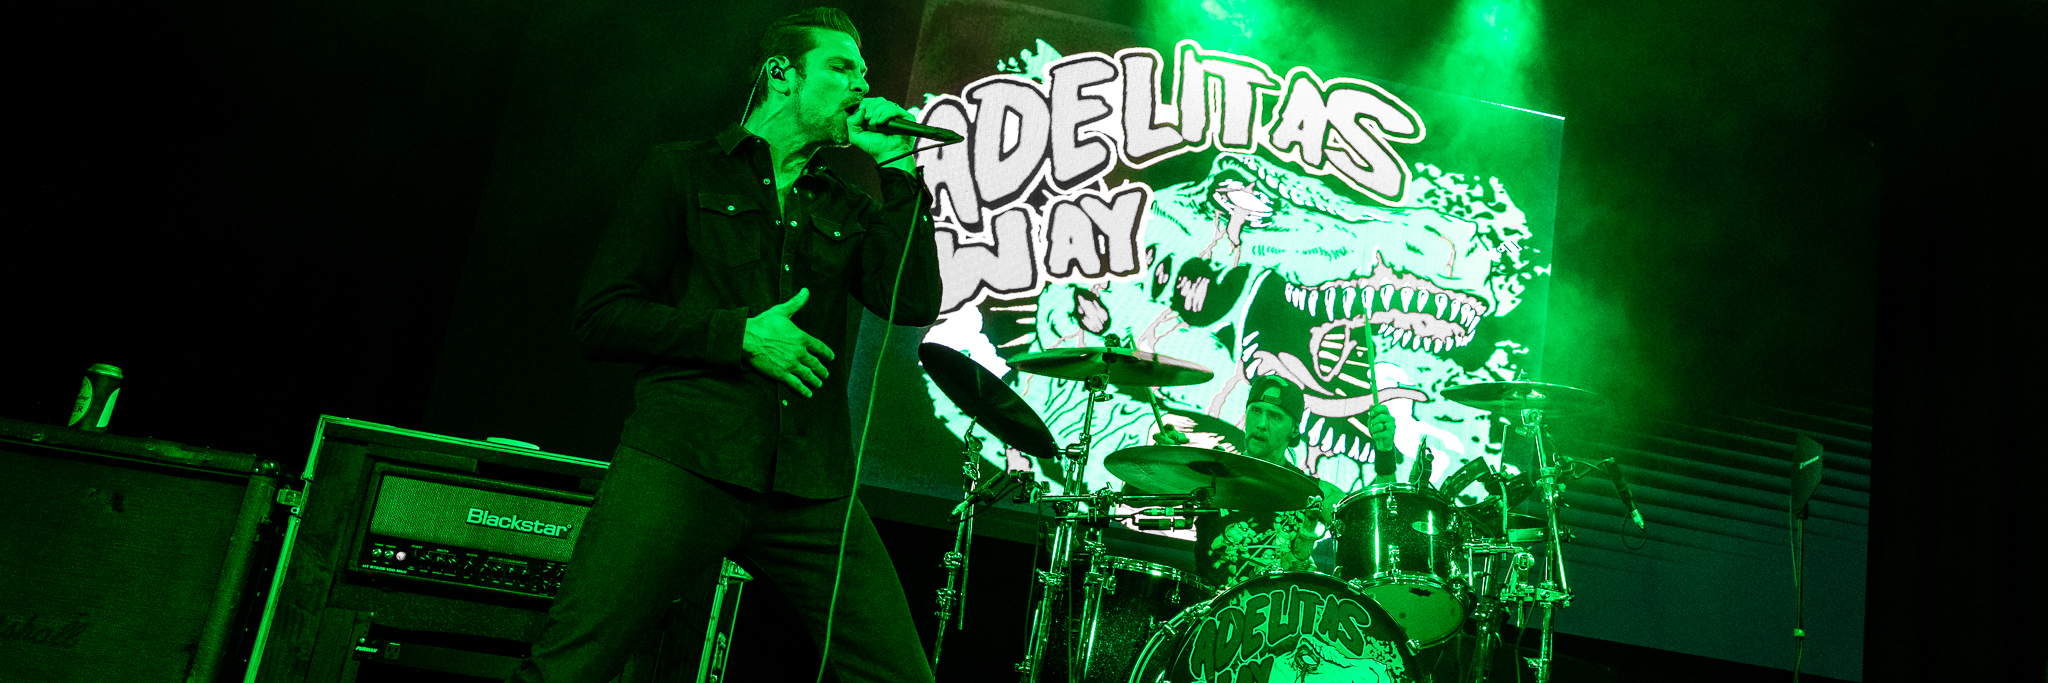 Adelitas Way, Seven Year Witch Give Fans A Solid Show